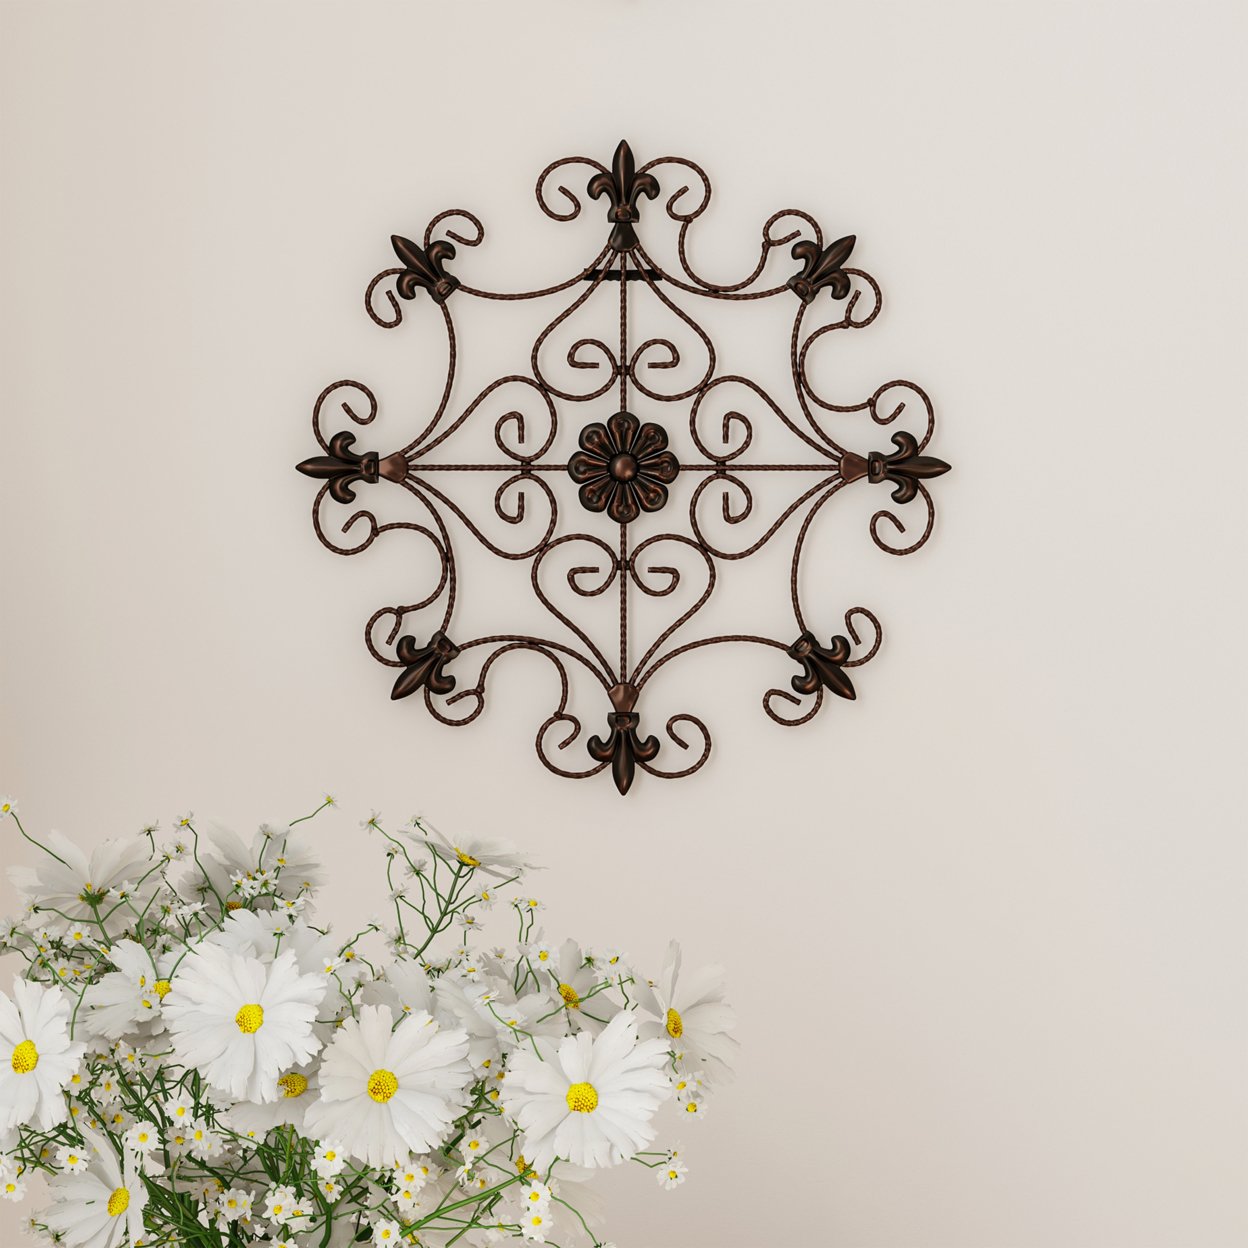 Medallion Metal Wall Art- 14.25 Inch Square Open Edge Metal Hand Crafted With Distressed Finish